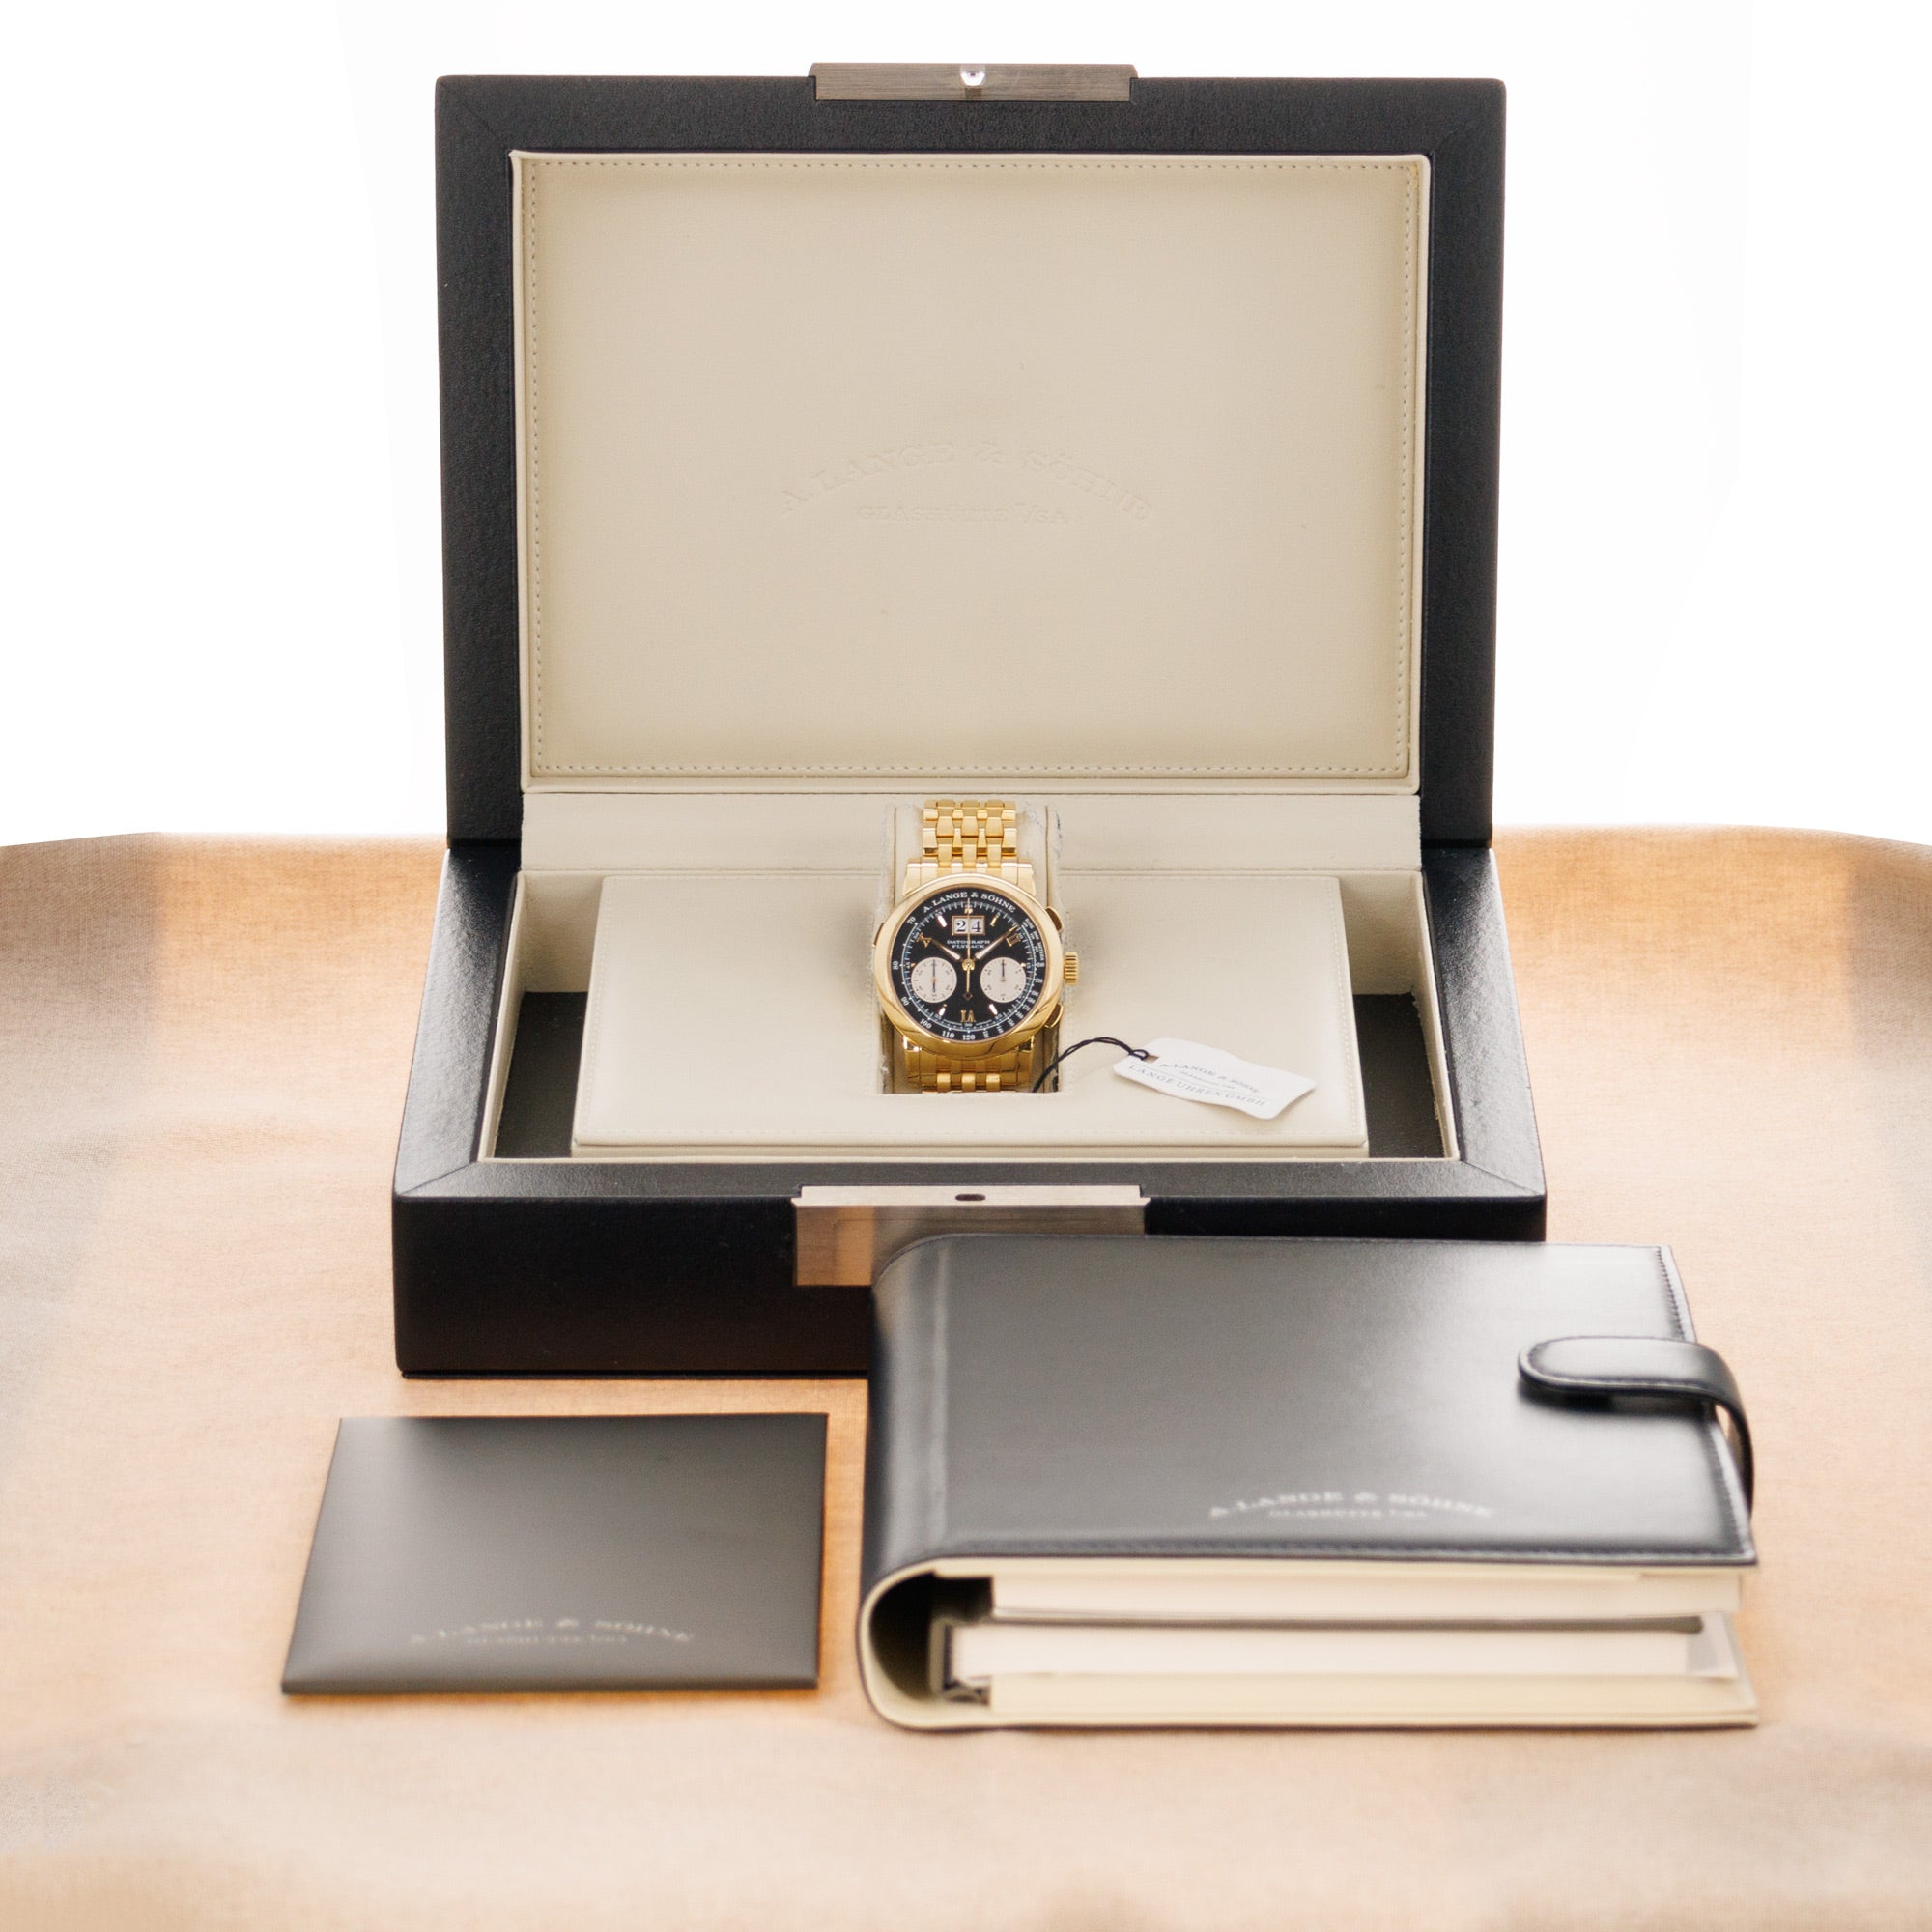 A. Lange &amp; Sohne - A. Lange &amp; Sohne Yellow Gold Datograph Watch Ref. 403.041 on Wellendorf Bracelet - The Keystone Watches